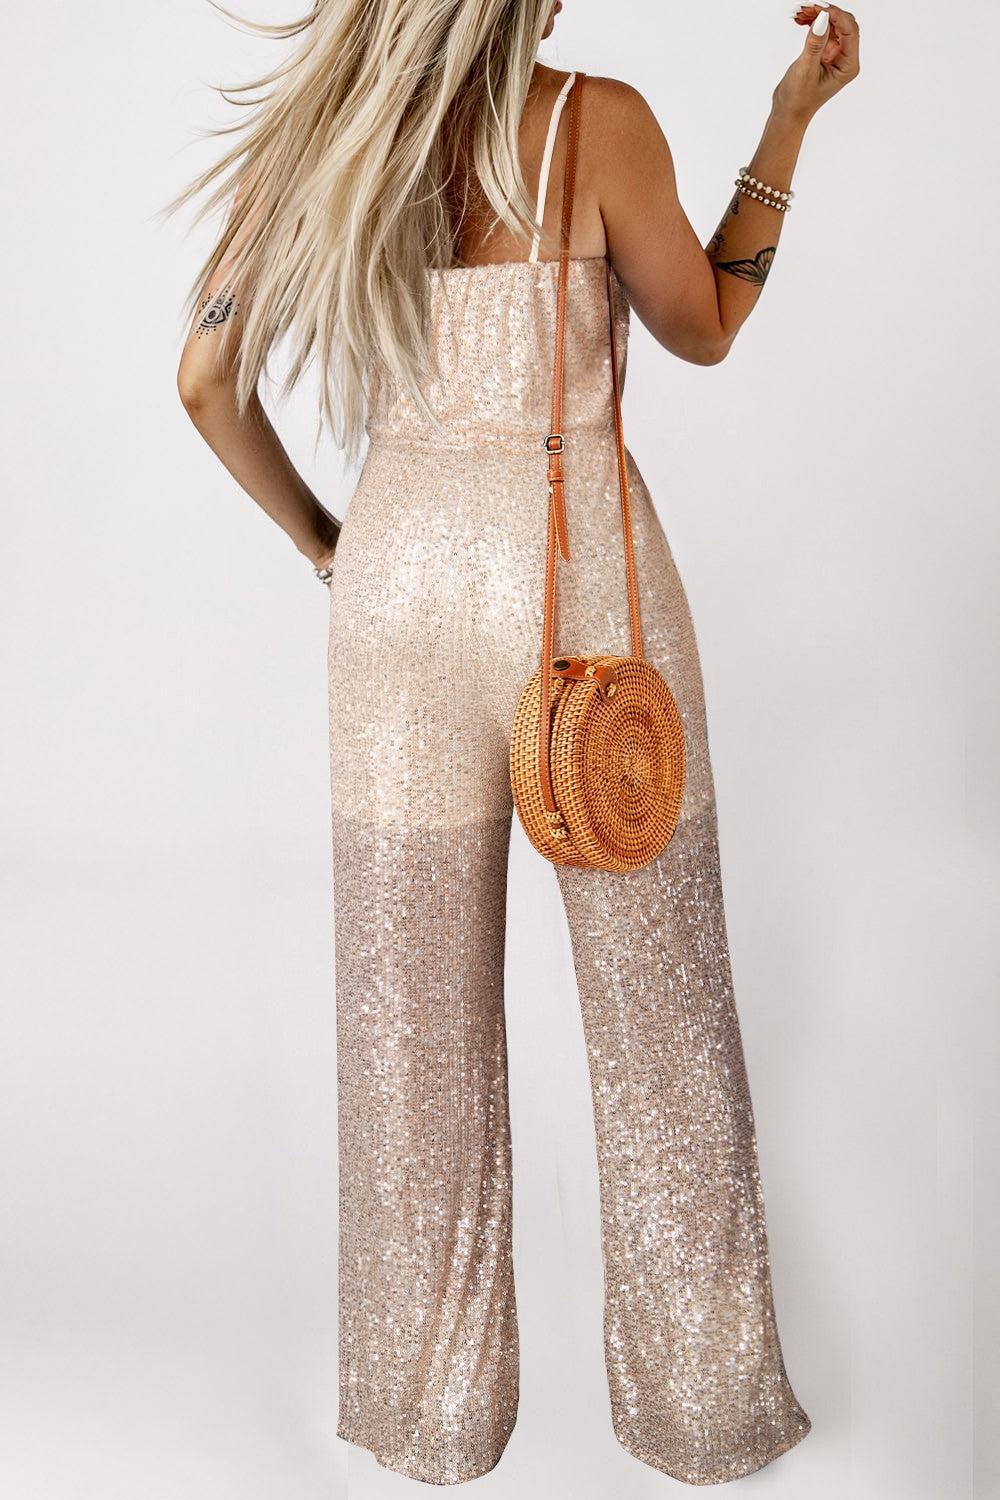 a woman in a gold sequin jumpsuit holding a straw bag